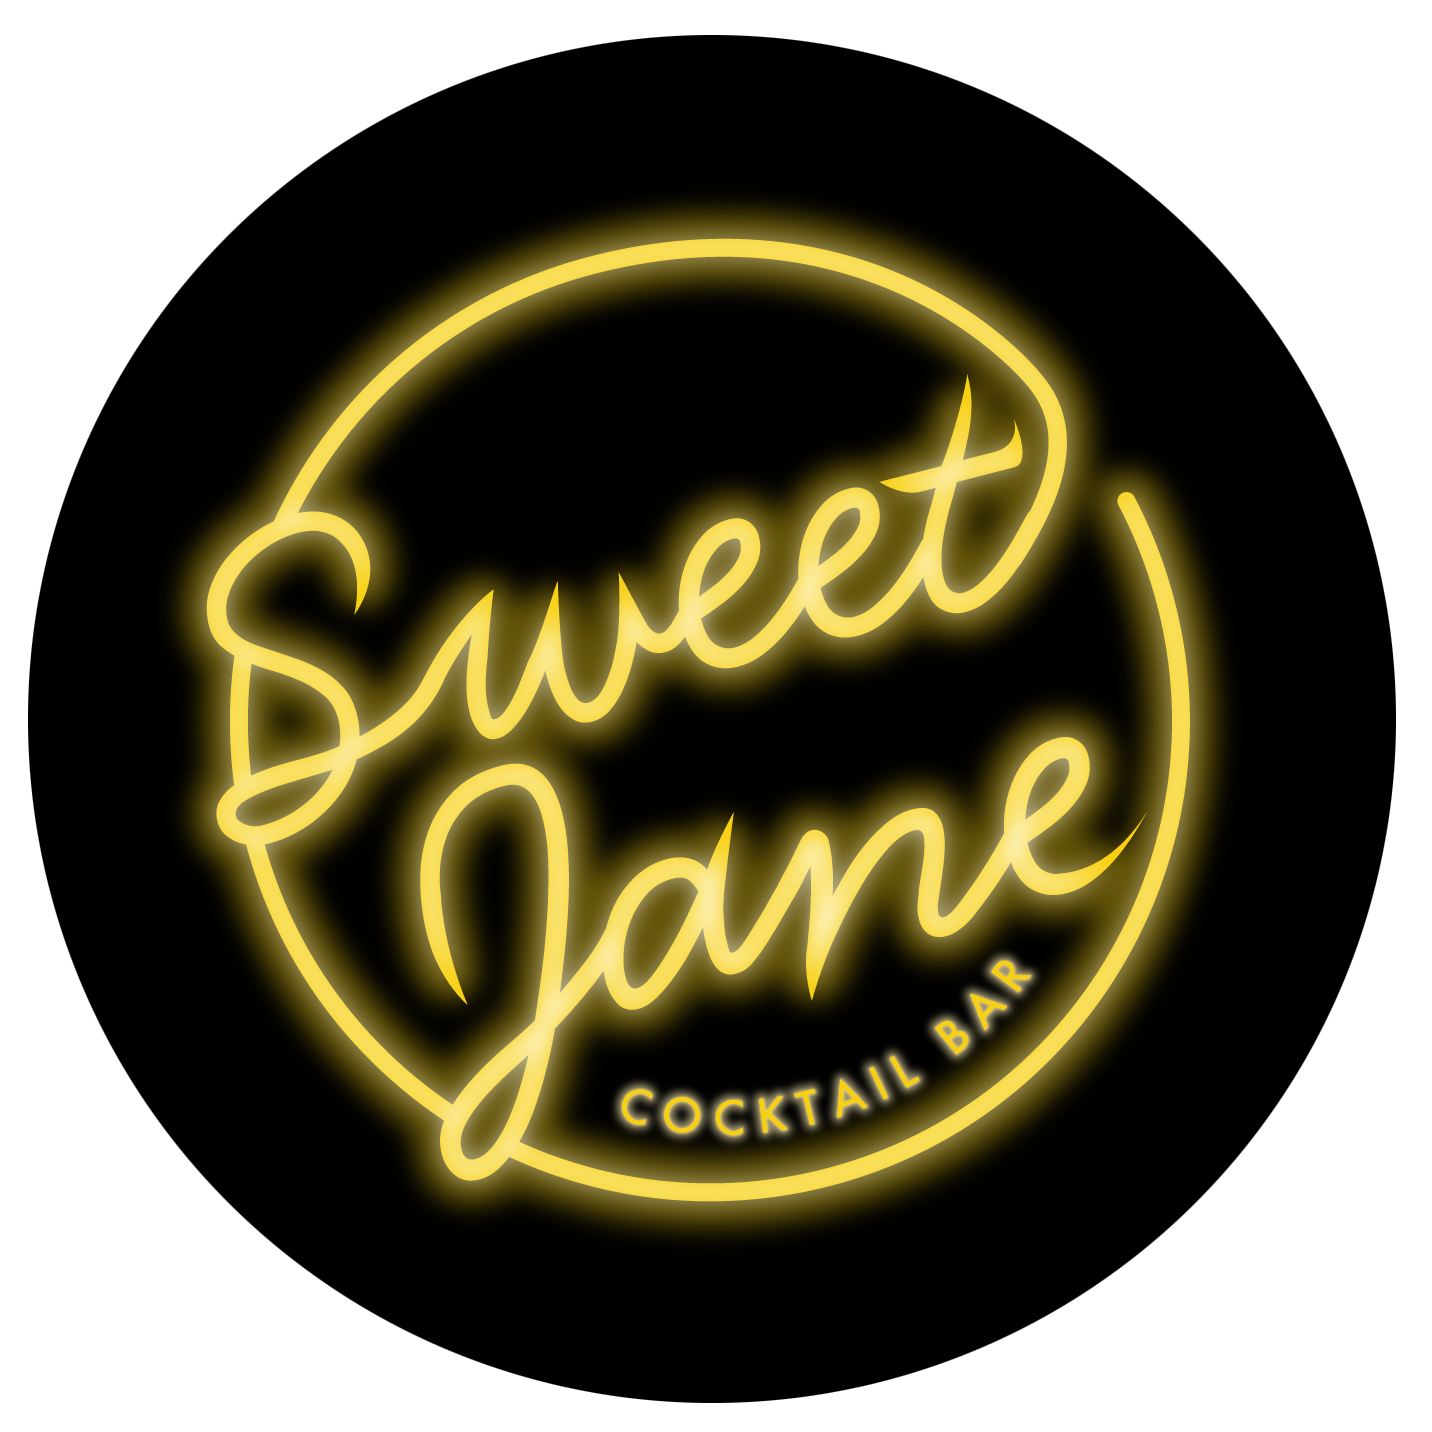 A neon sign for sweet jane cocktail bar